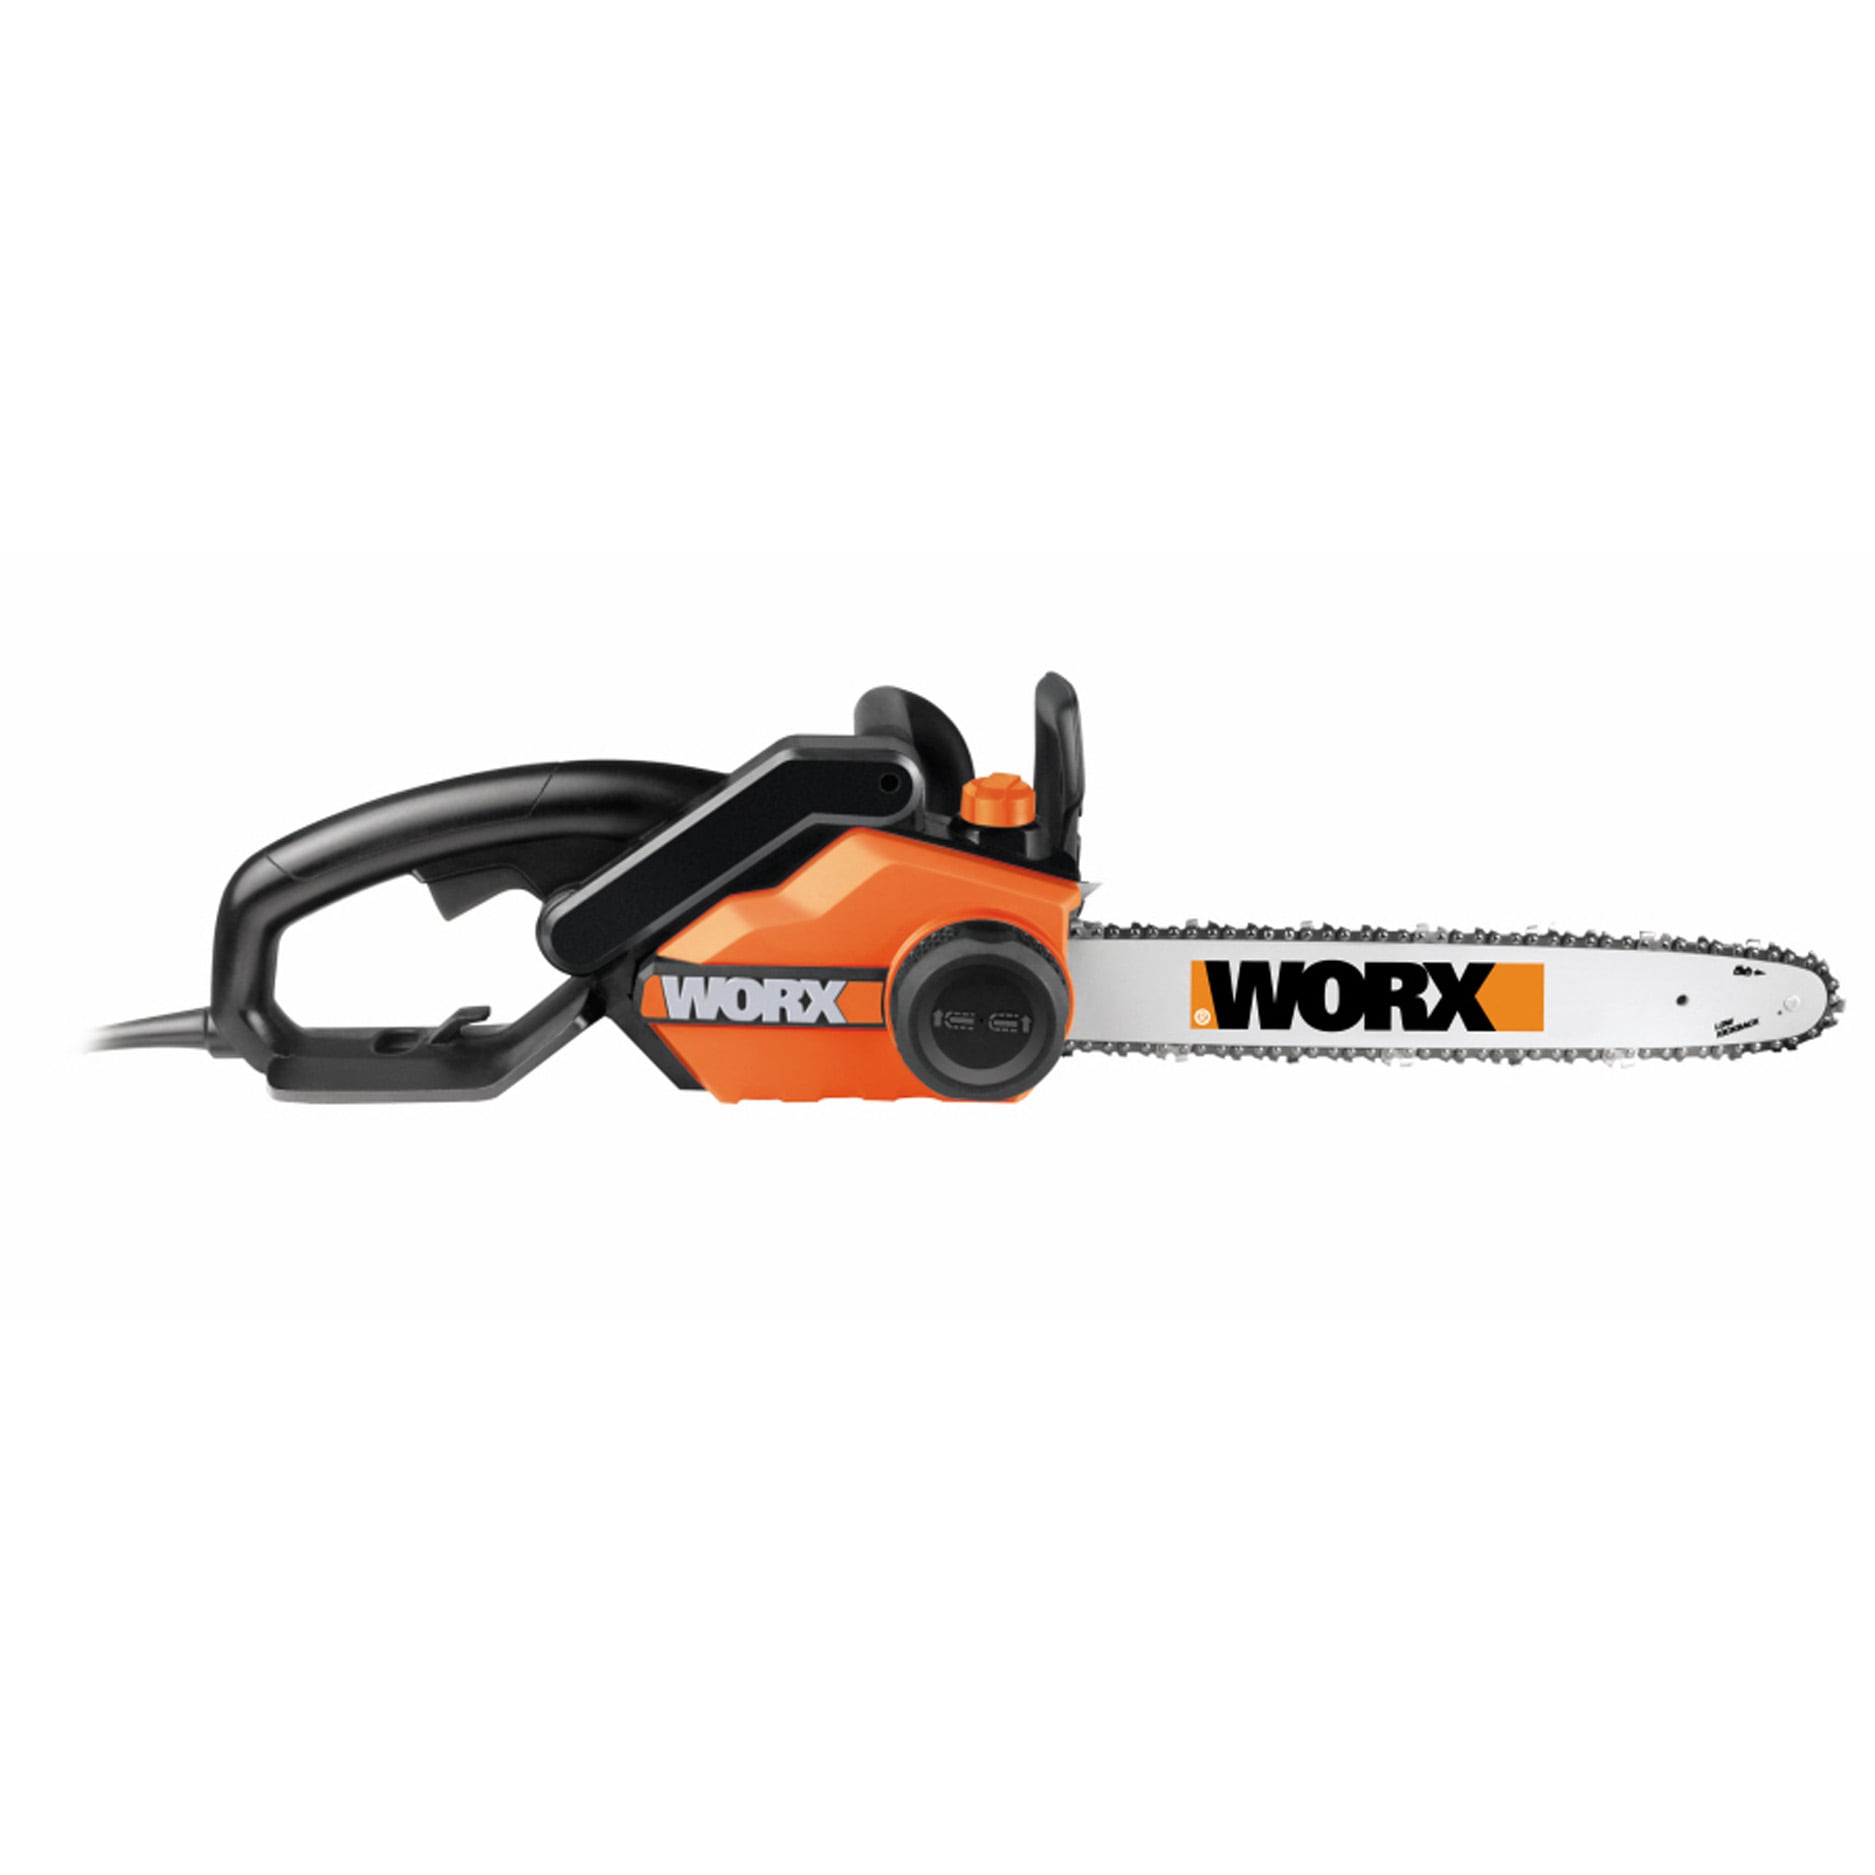 Worx 14 in. 8 Amp Electric Chainsaw WG305 - The Home Depot